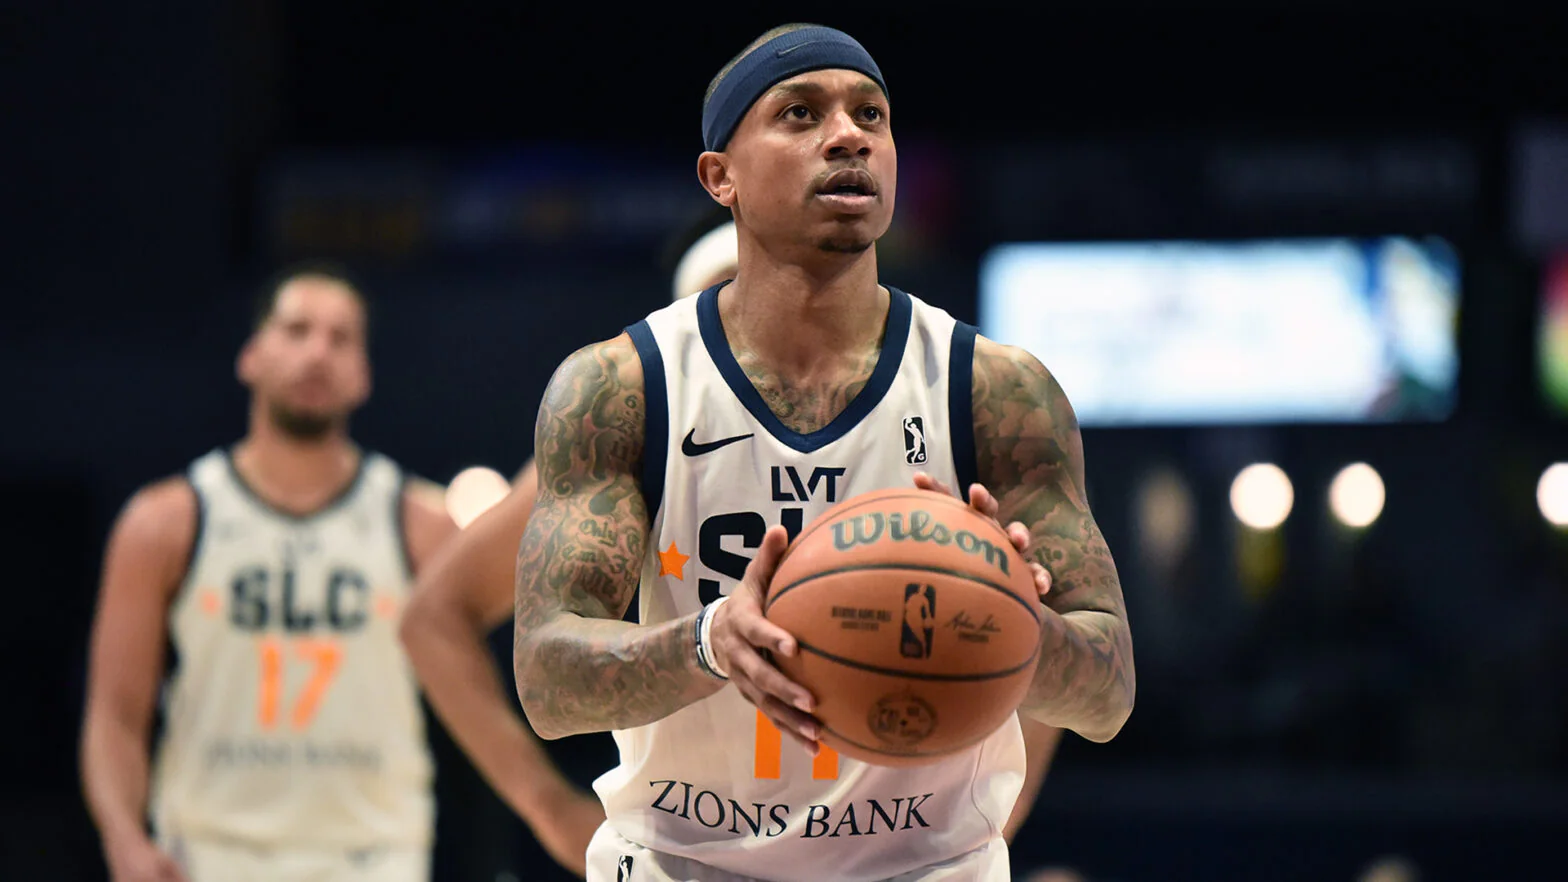 Isaiah Thomas hailed as “greatest grinder ever” following his first outing in two years